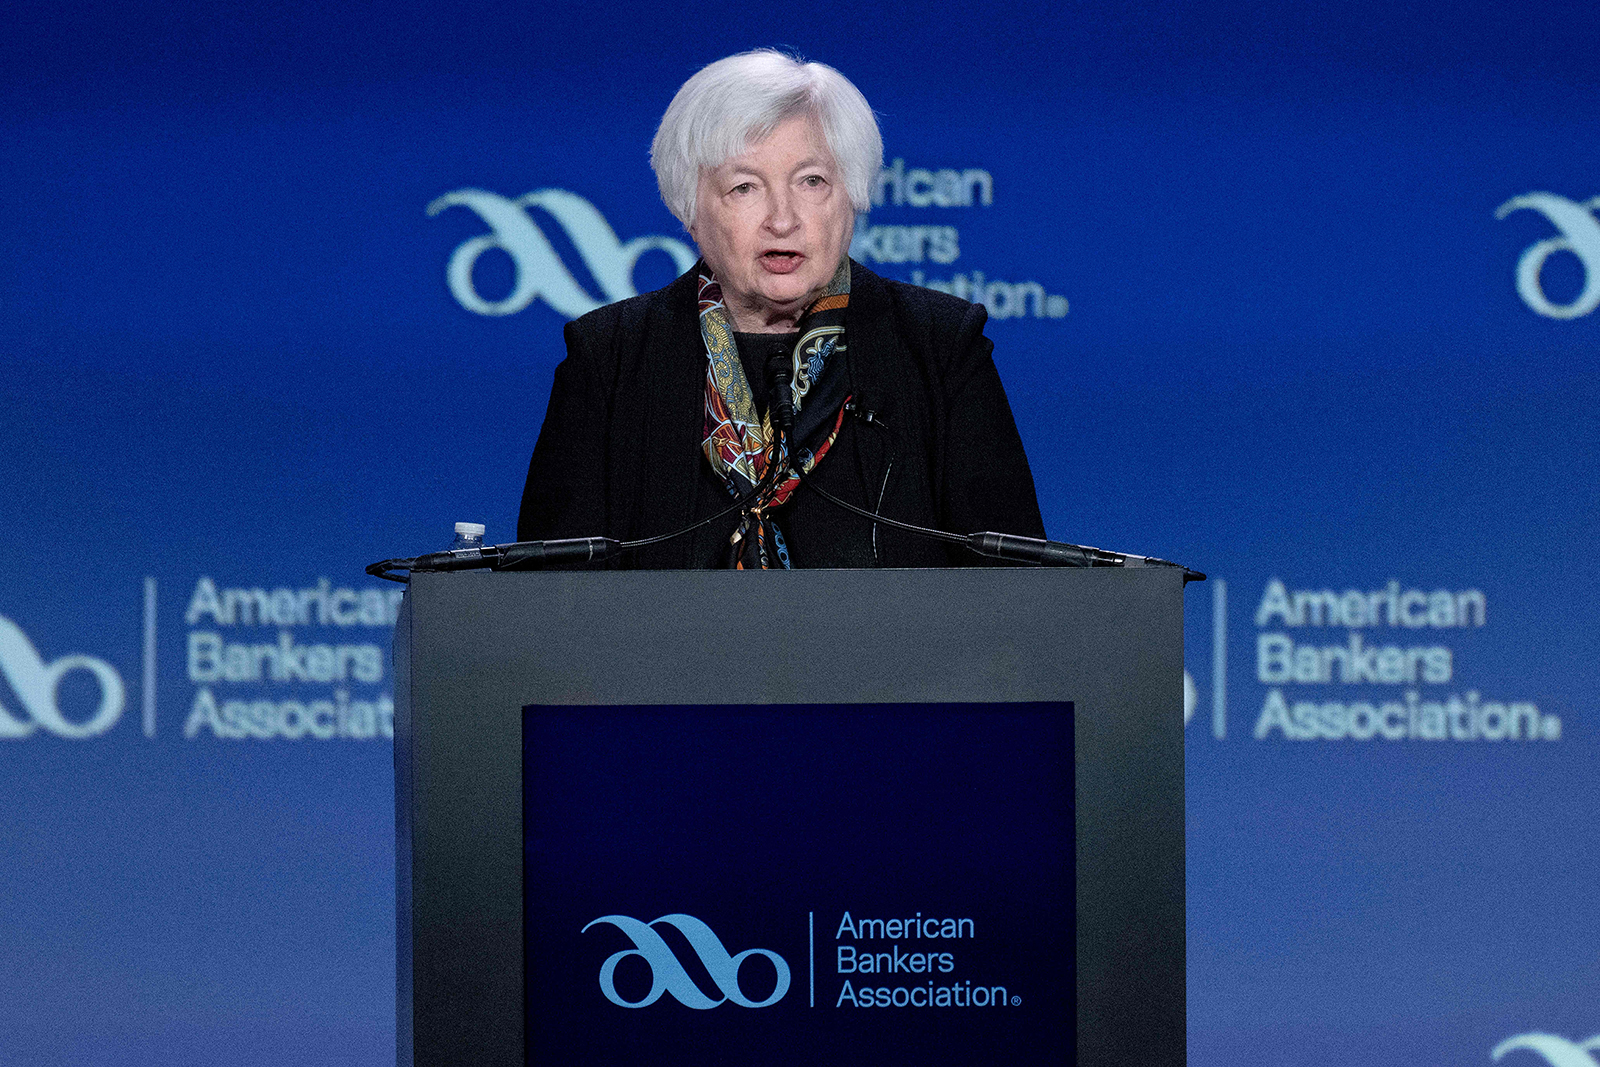 US Treasury Secretary Janet Yellen delivering a keynote address at the American Bankers Association's (ABA) 2023 Washington Summit in Washington, DC, today.